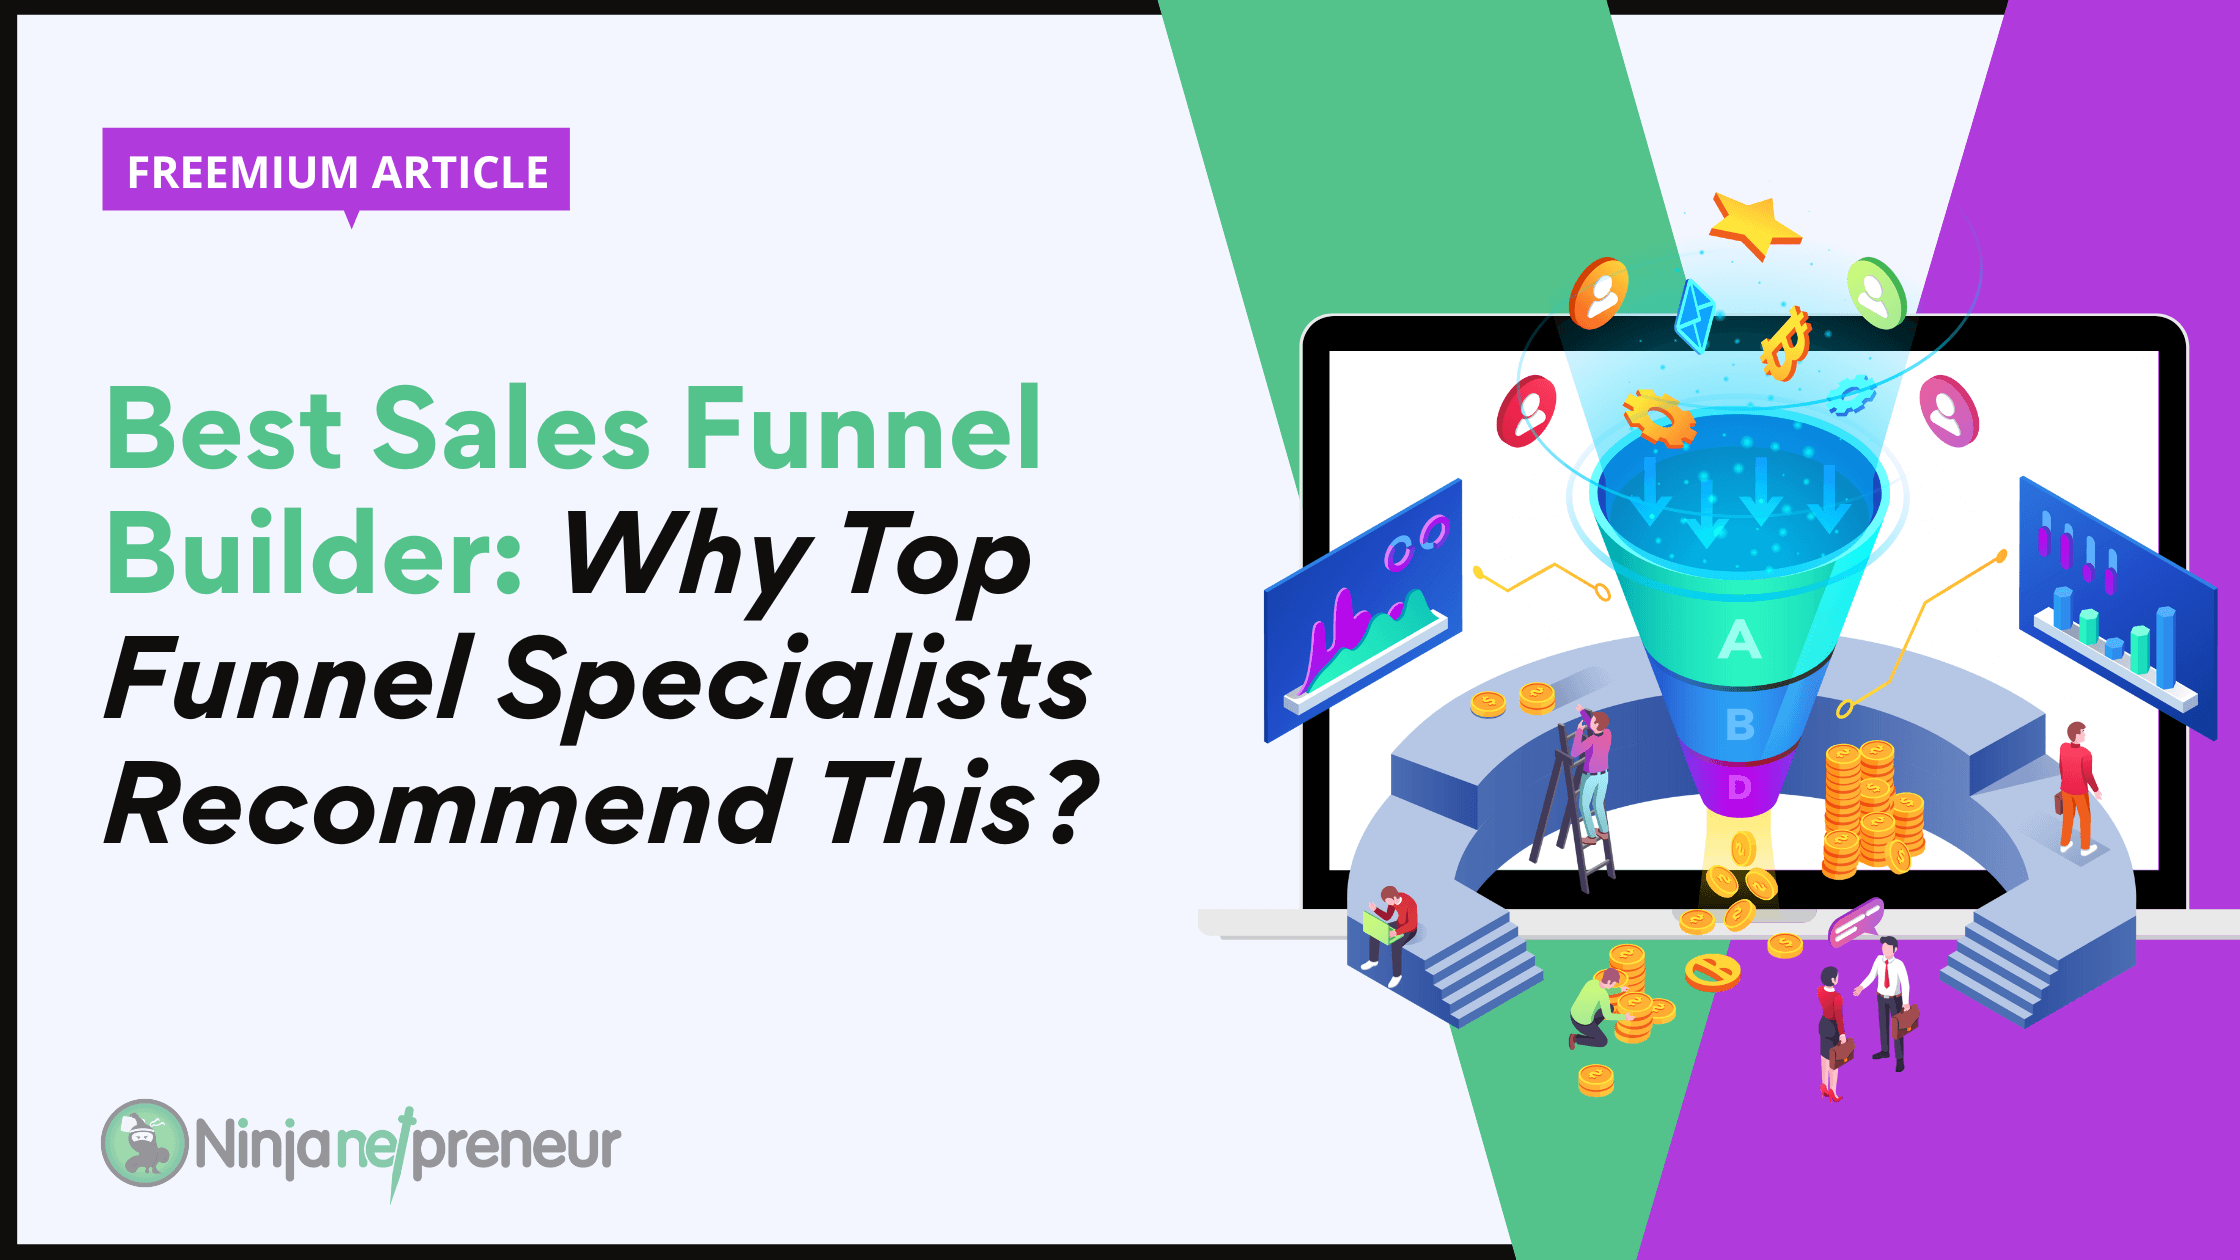 Best Sales Funnel Builder: Why Top Funnel Specialists Recommend Systeme?